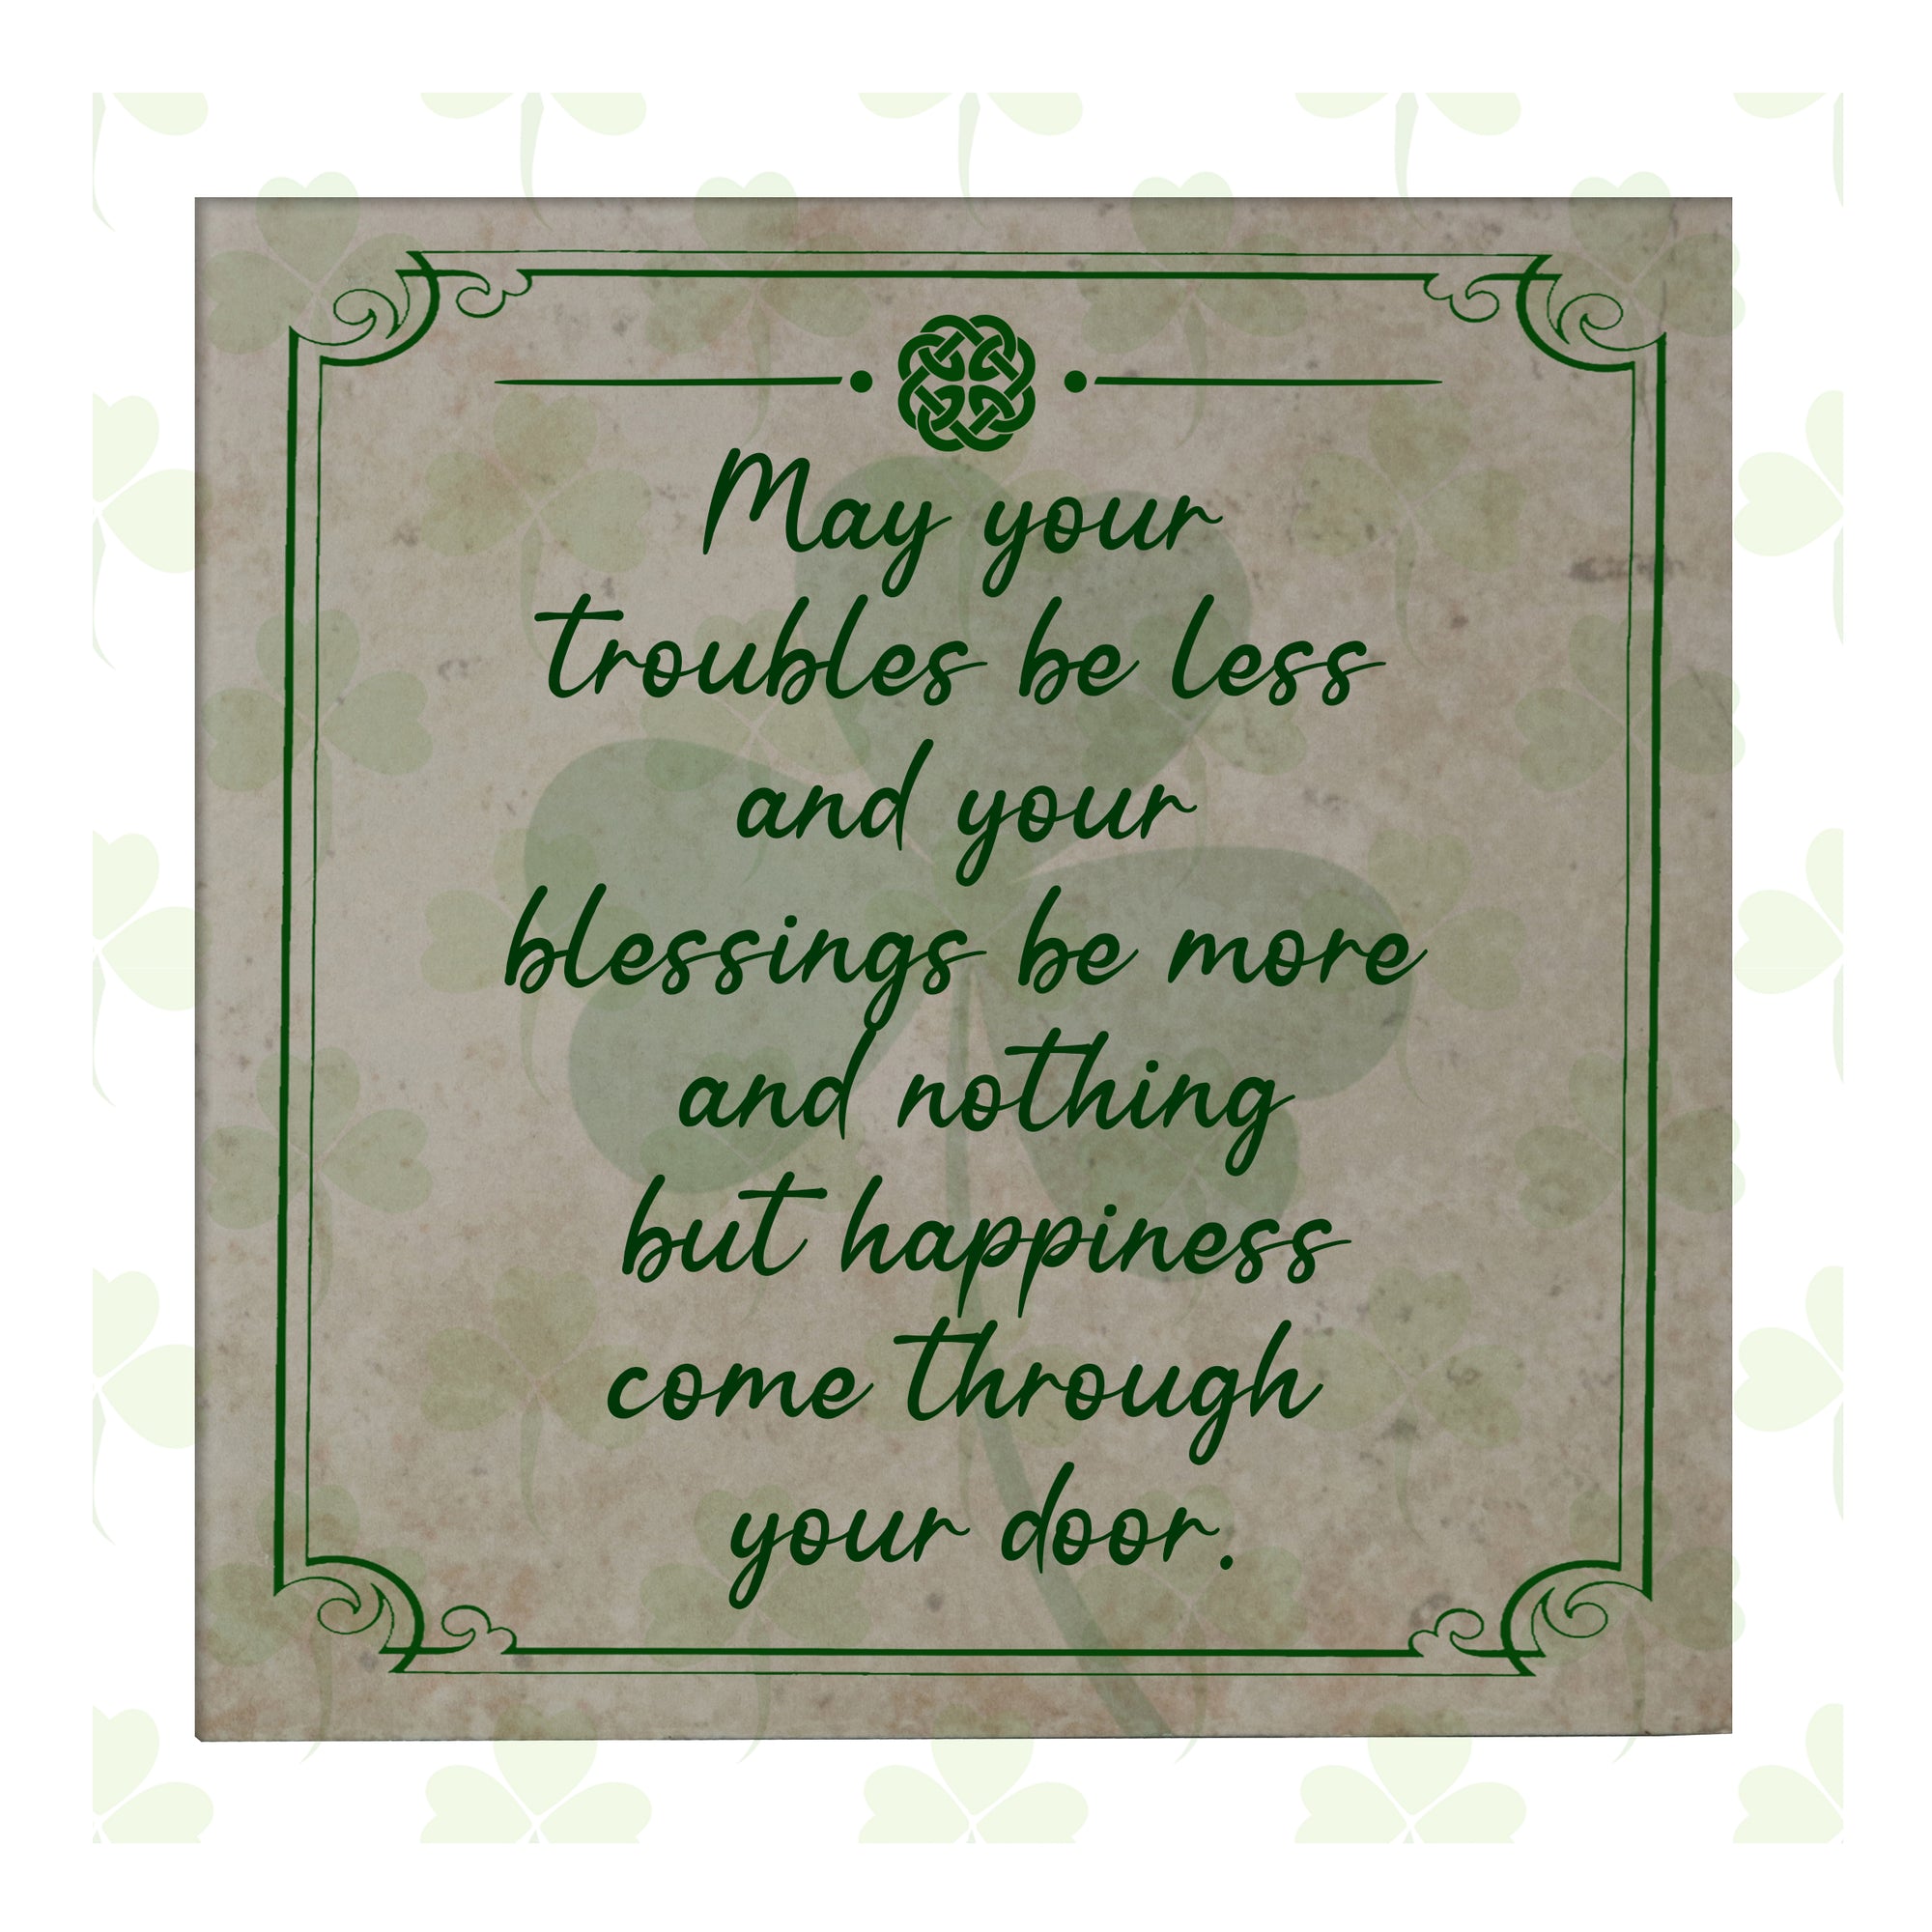 St. Patrick's Day Irish Everyday Trivet 5.75x5.75 - May Your Troubles Be Less